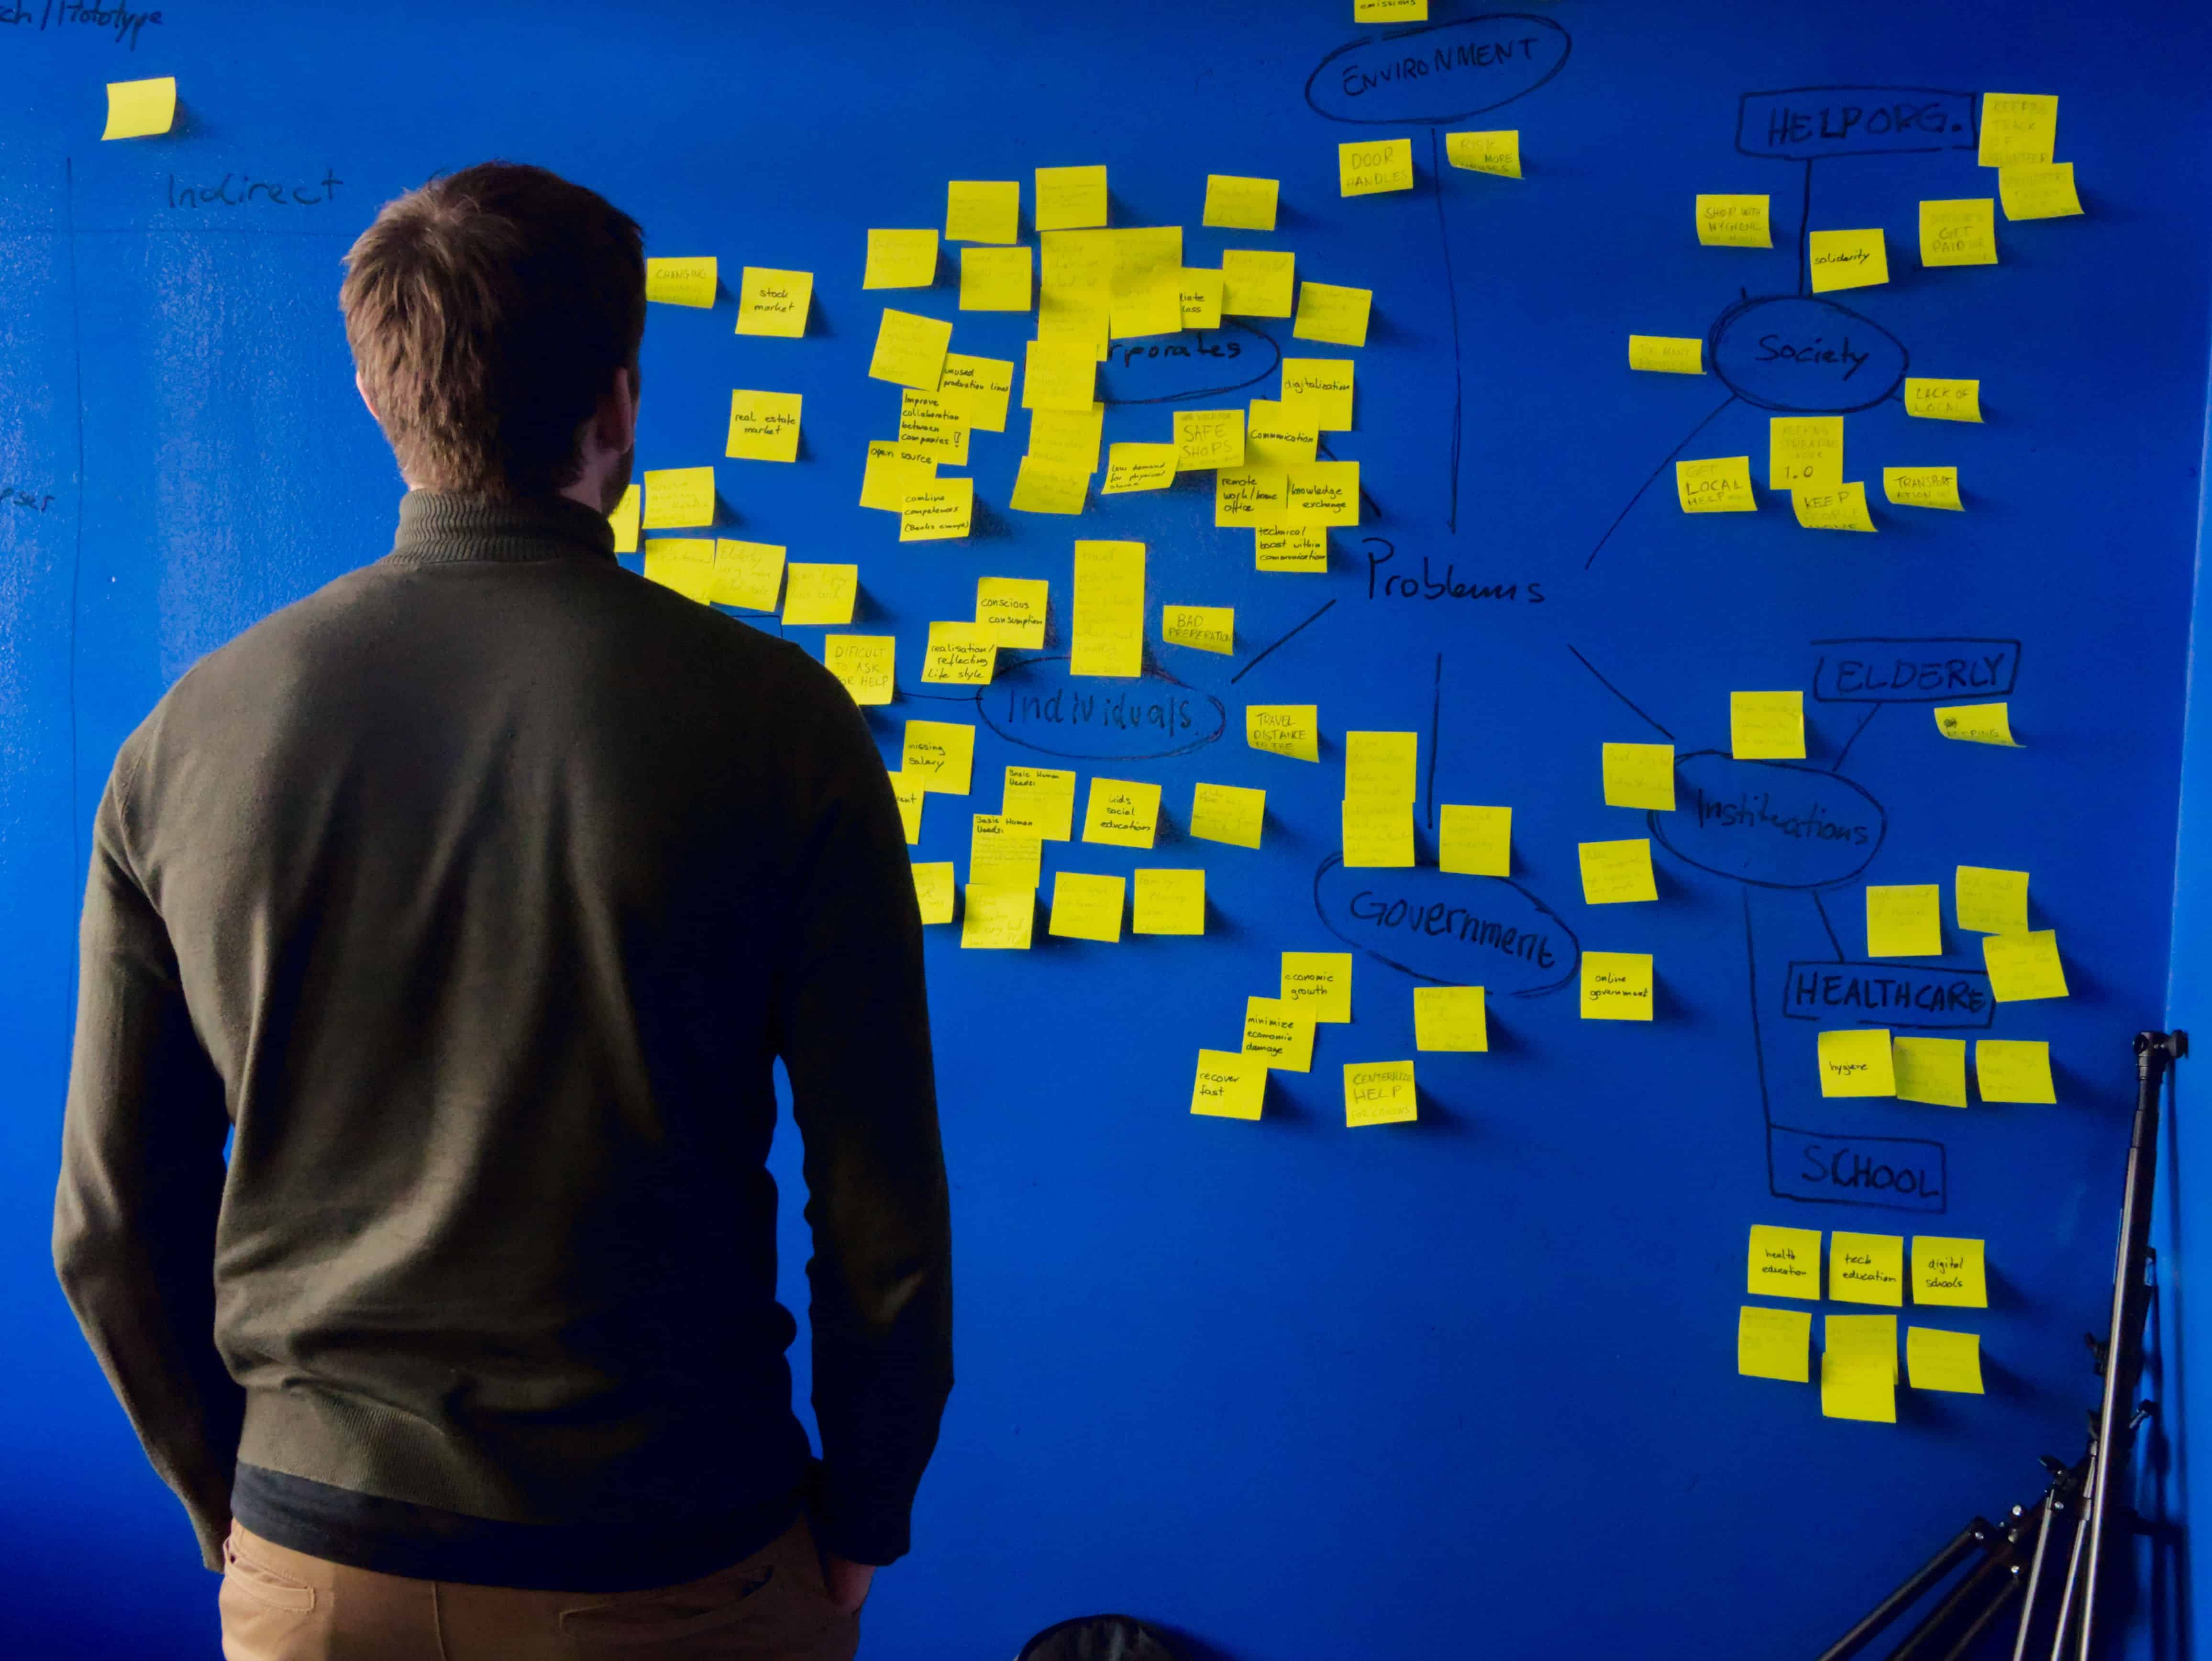 A man brainstorms with post-it notes